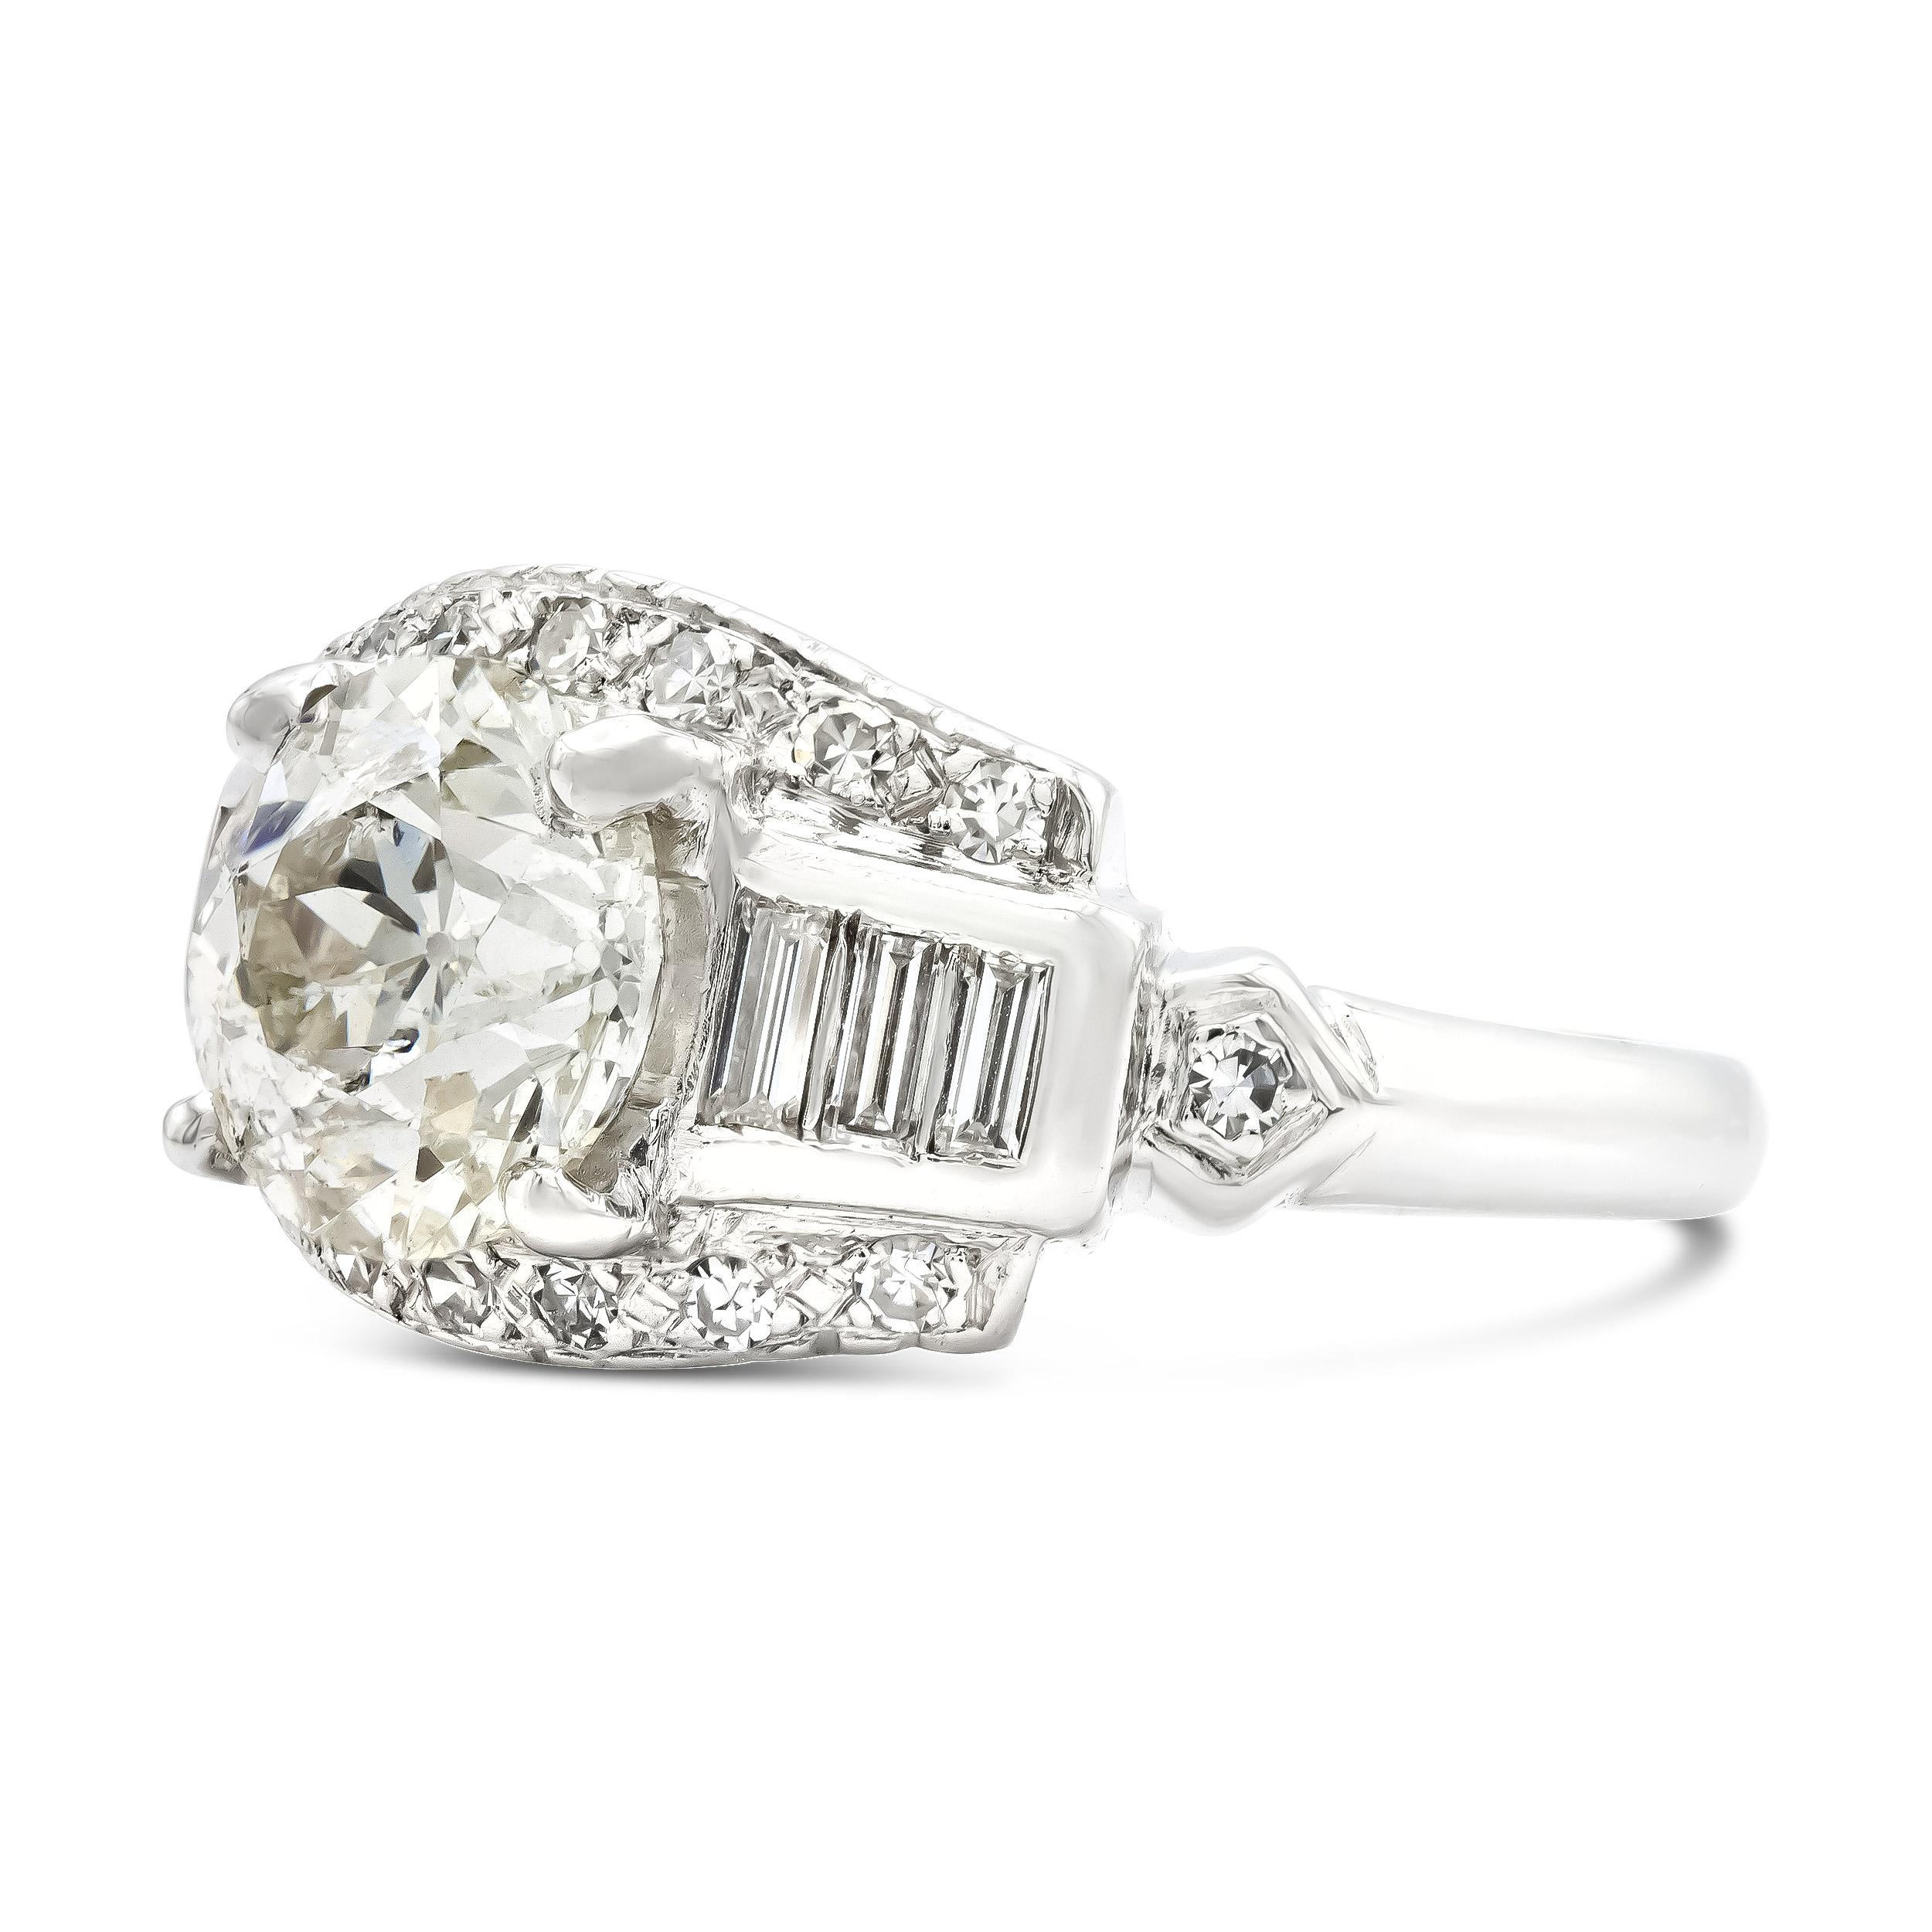 There is so much to love about the bright old European cut that centers this vintage engagement ring. The 3 carat diamond has those classically antique facet patterns that we so appreciate. We love how the side baguettes, fashioned in a super cool